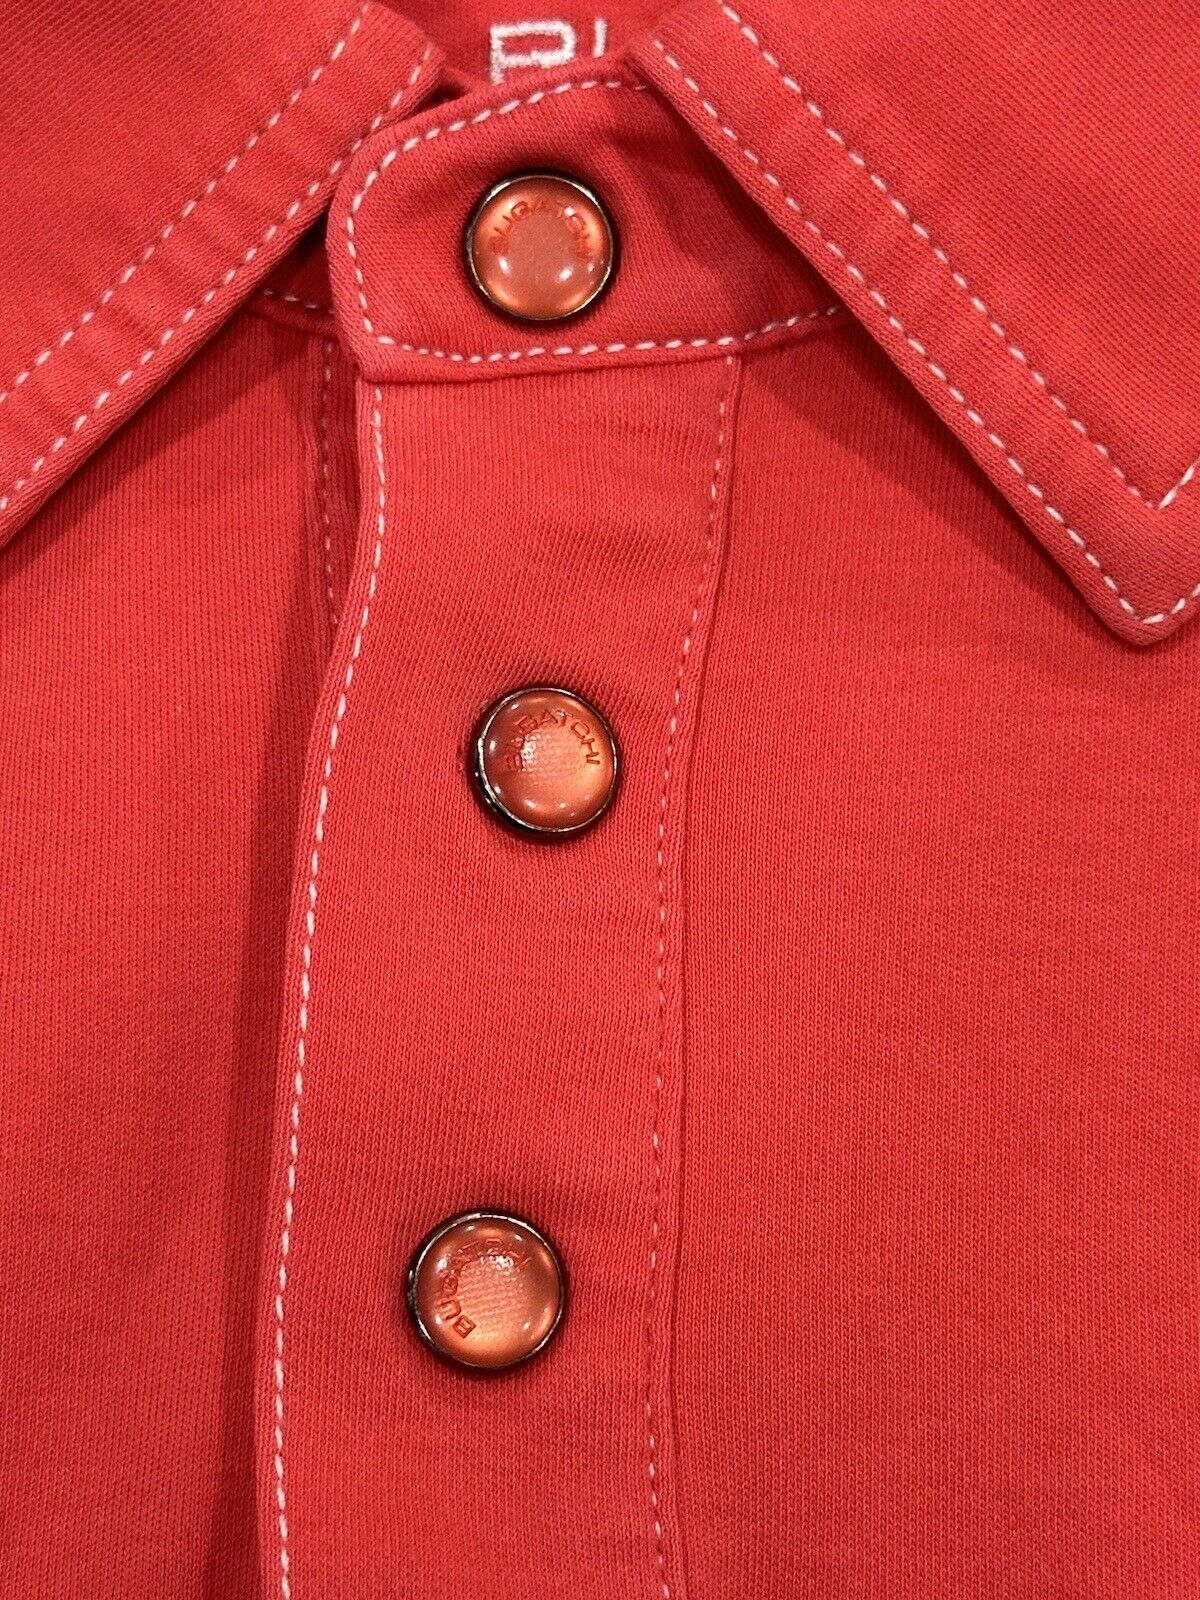 Bugatchi Uomo Mens Size L Red Snap Buttons Cotton… - image 7